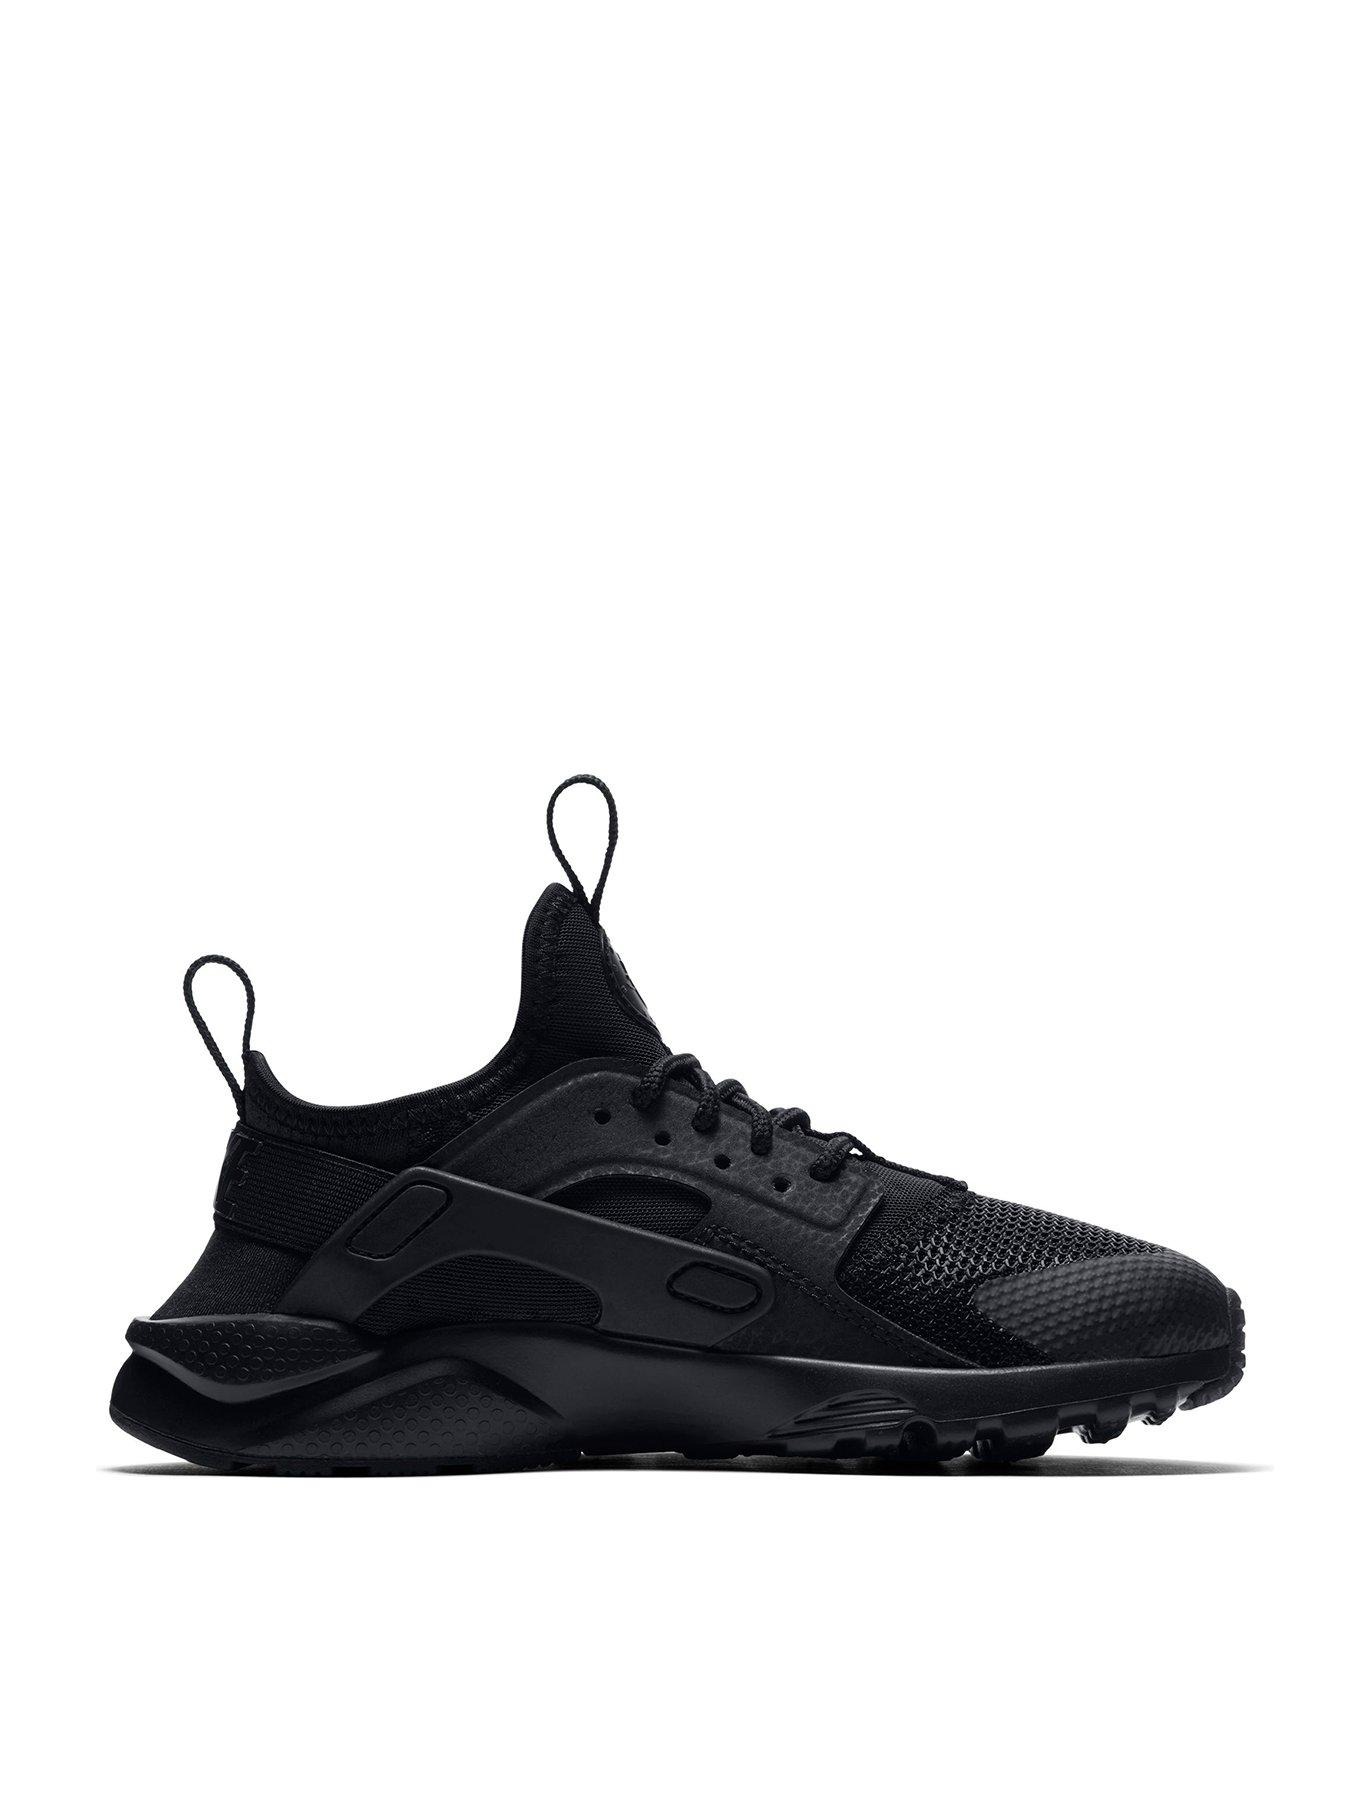 Deals Everyday sports direct huaraches 